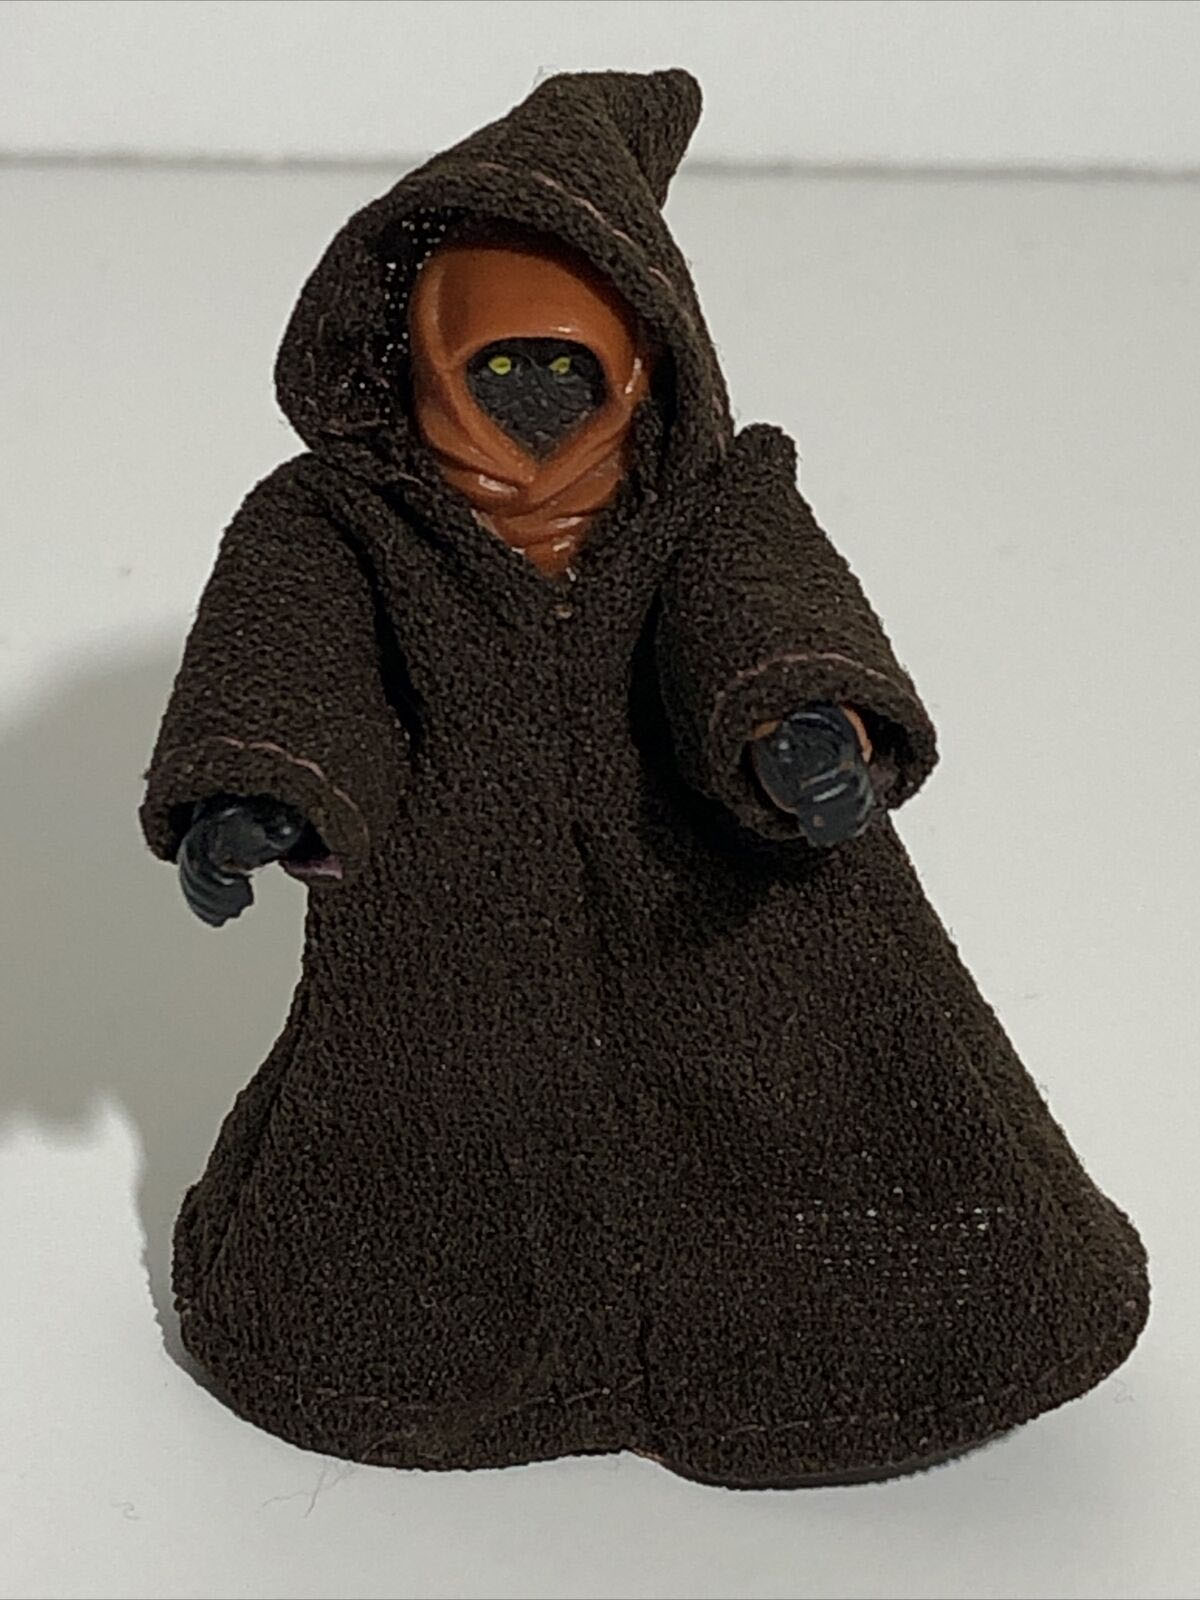 Star Wars Jawa 3.75 Inch Action Figure - Used